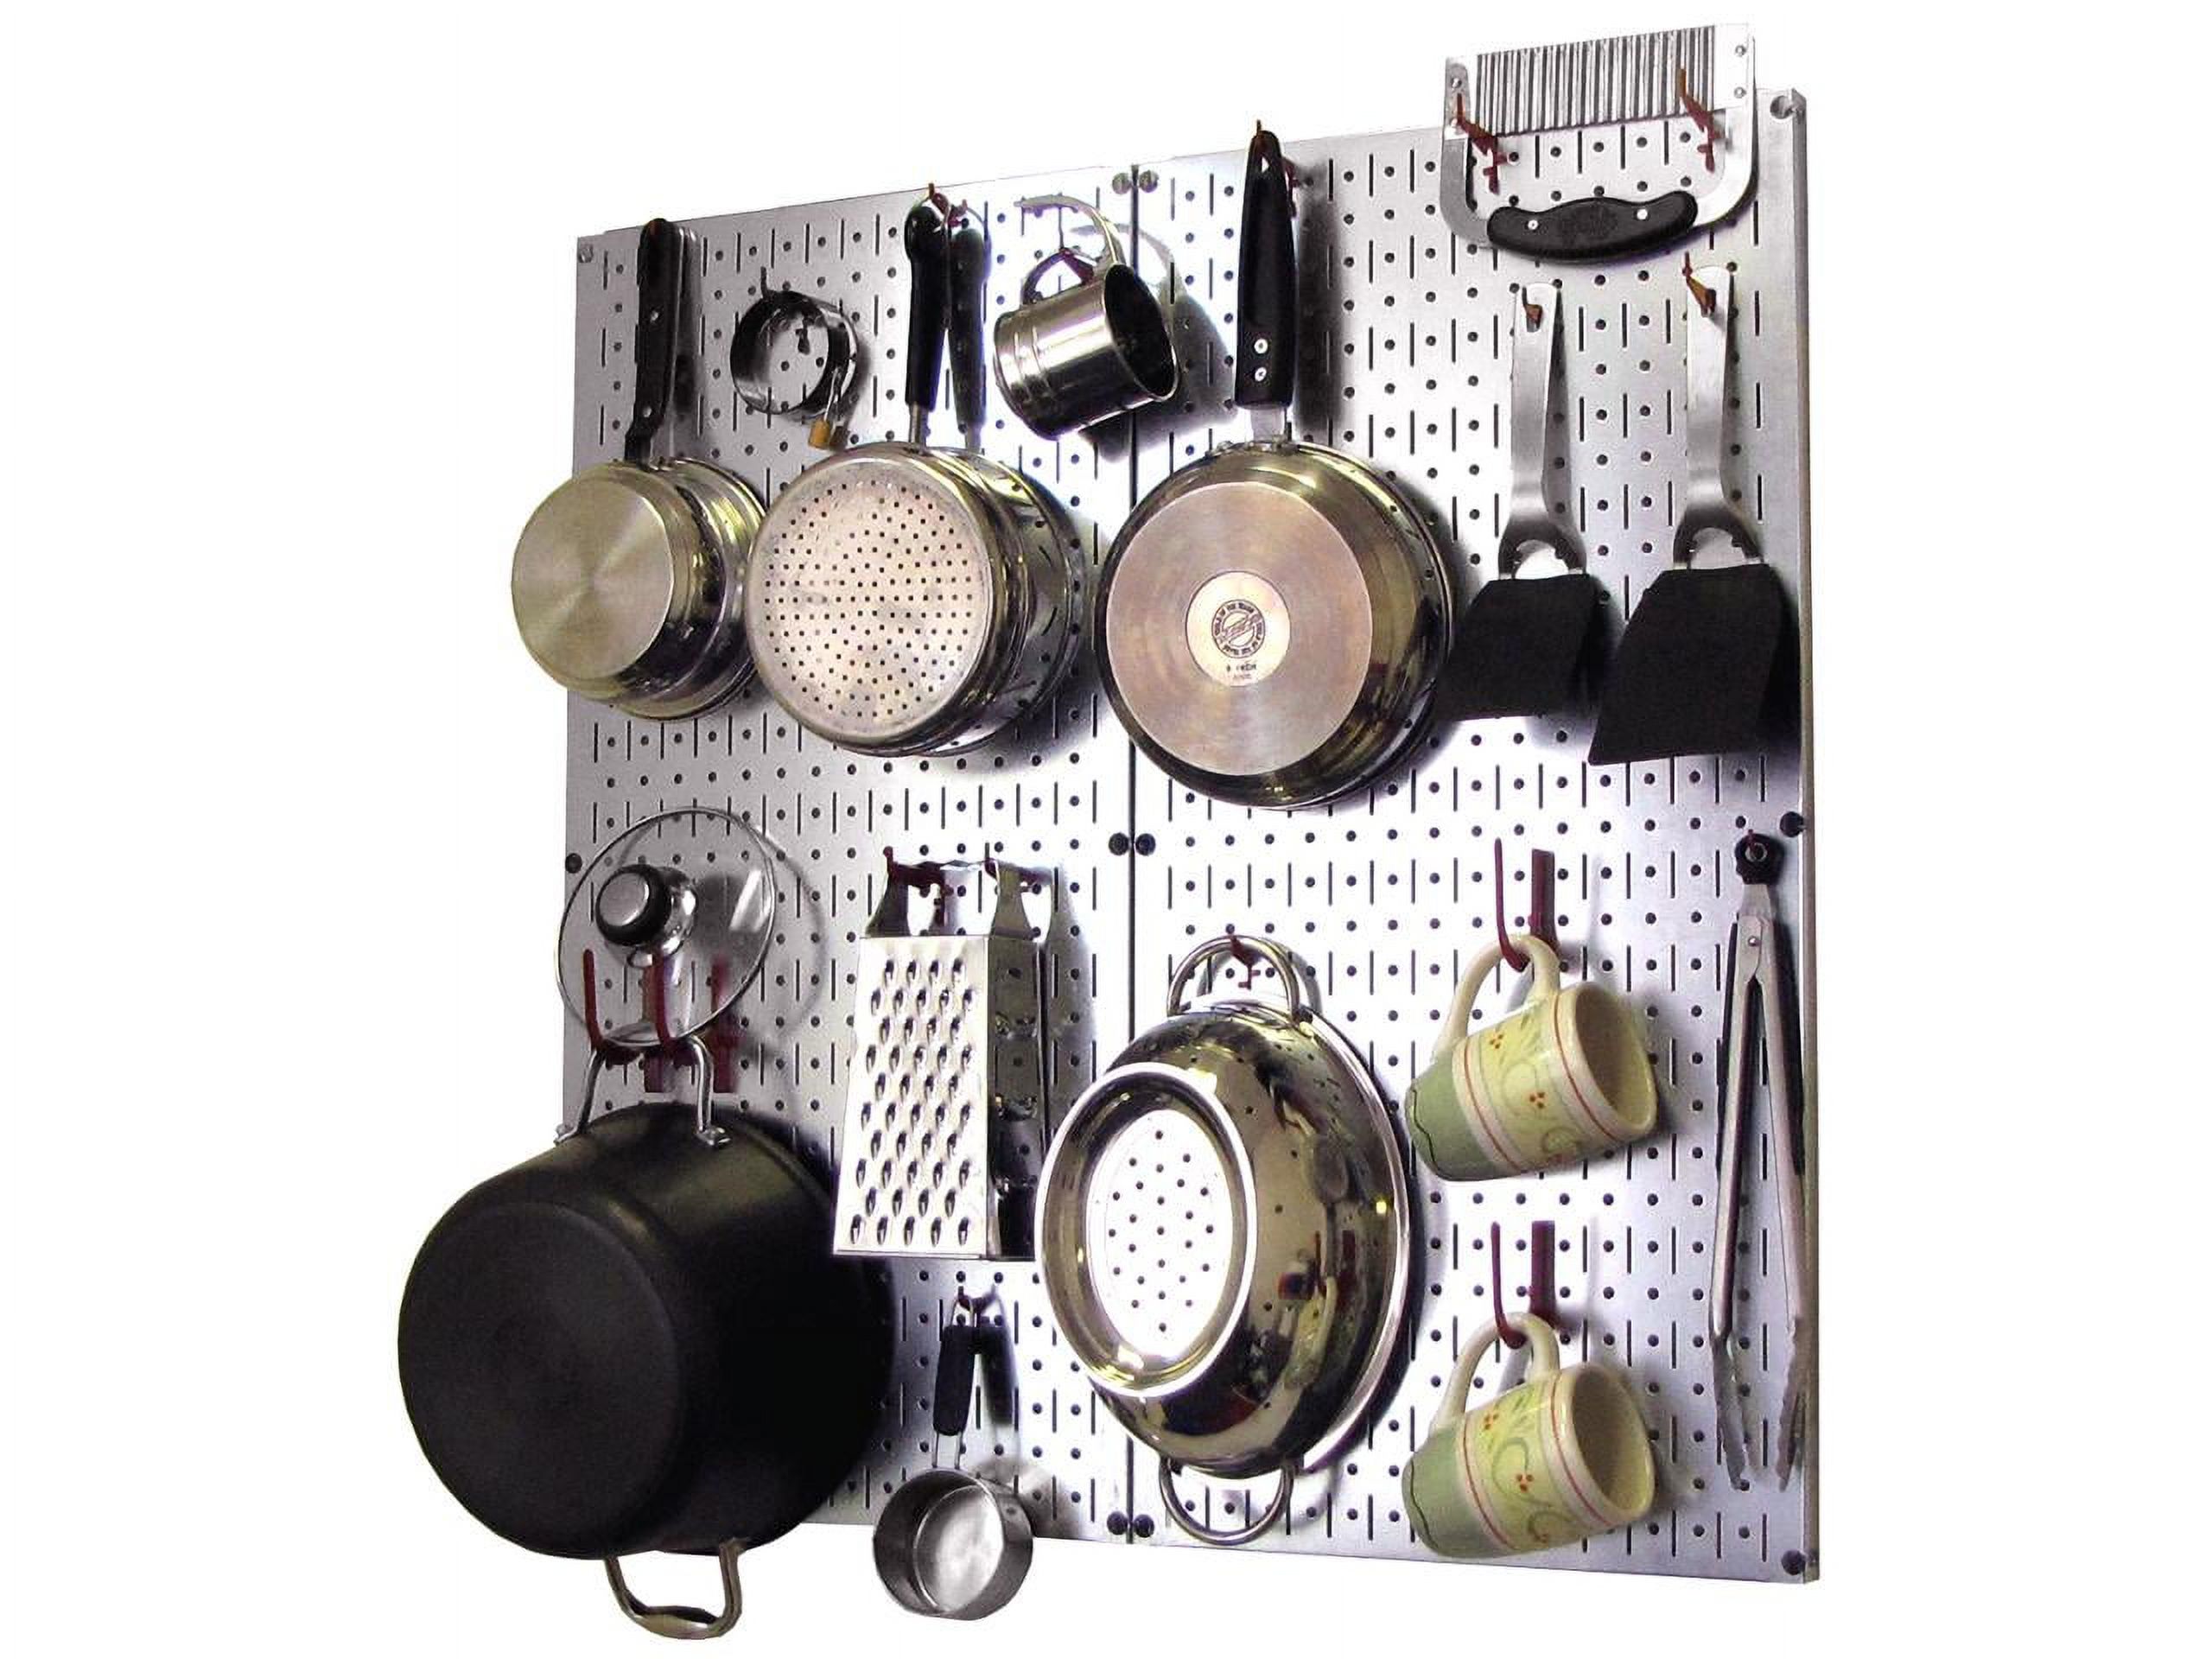 Wall Control Kitchen Pegboard Organizer Pots and Pans Pegboard Pack Storage and Organization Kit with Metallic Silver Pegboard and Red Accessories - image 1 of 7